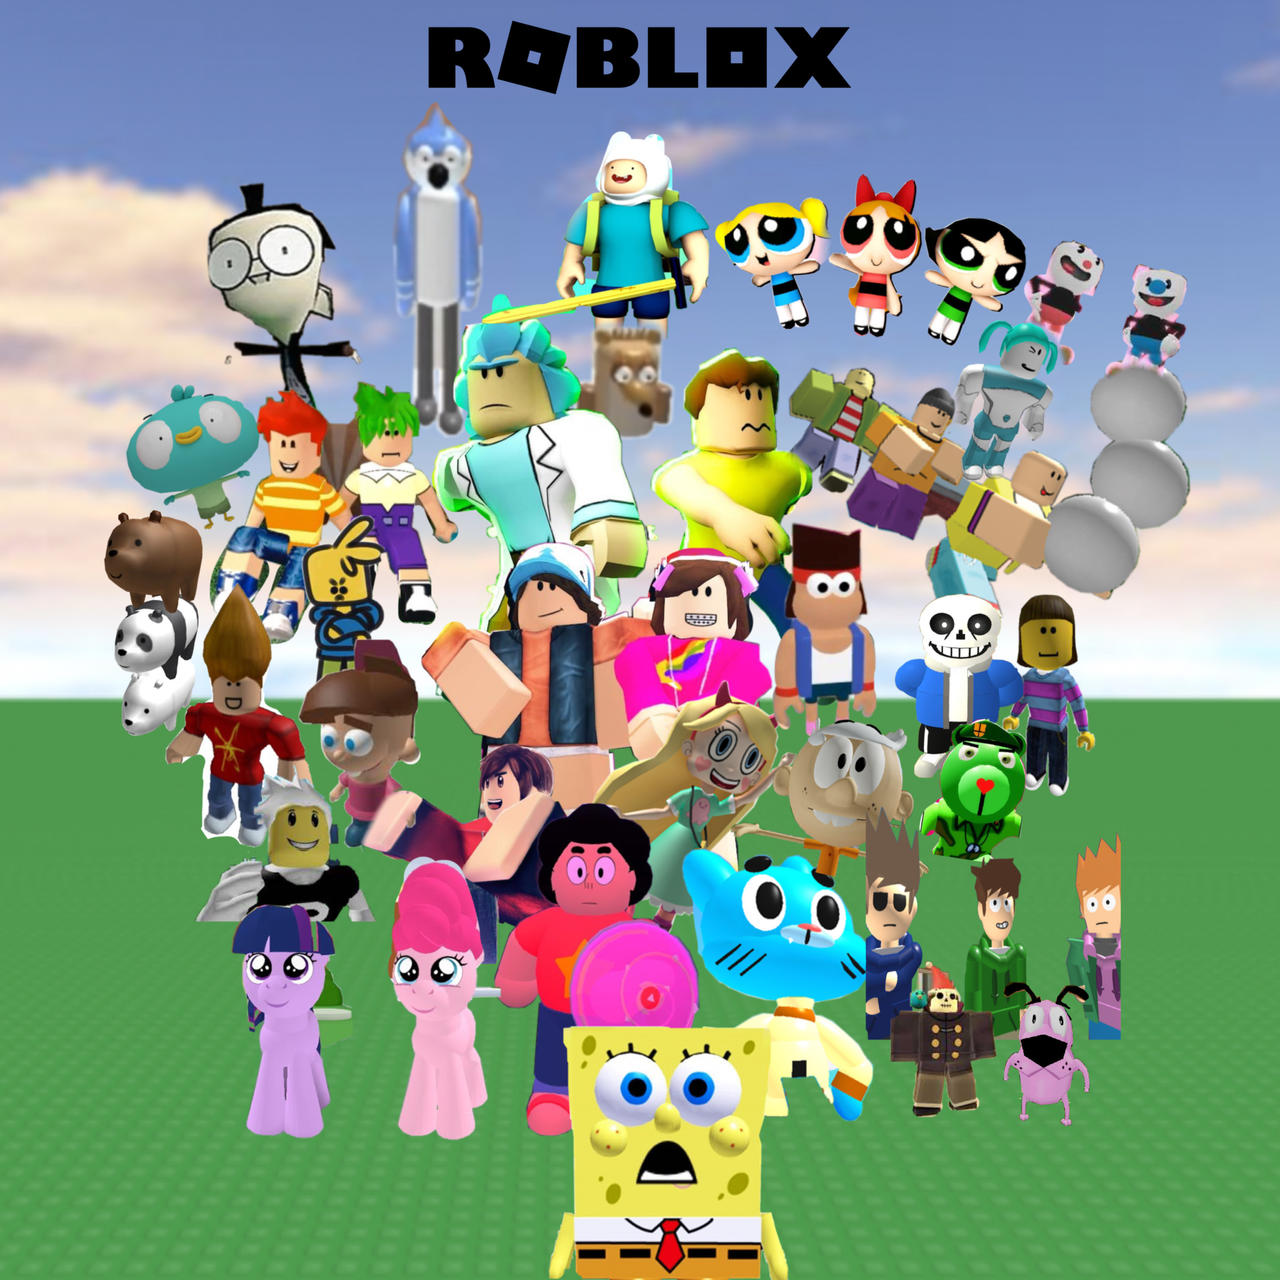 Pin by Obvs Maddss🌚 on Roblox  Roblox, Roblox roblox, Roblox animation